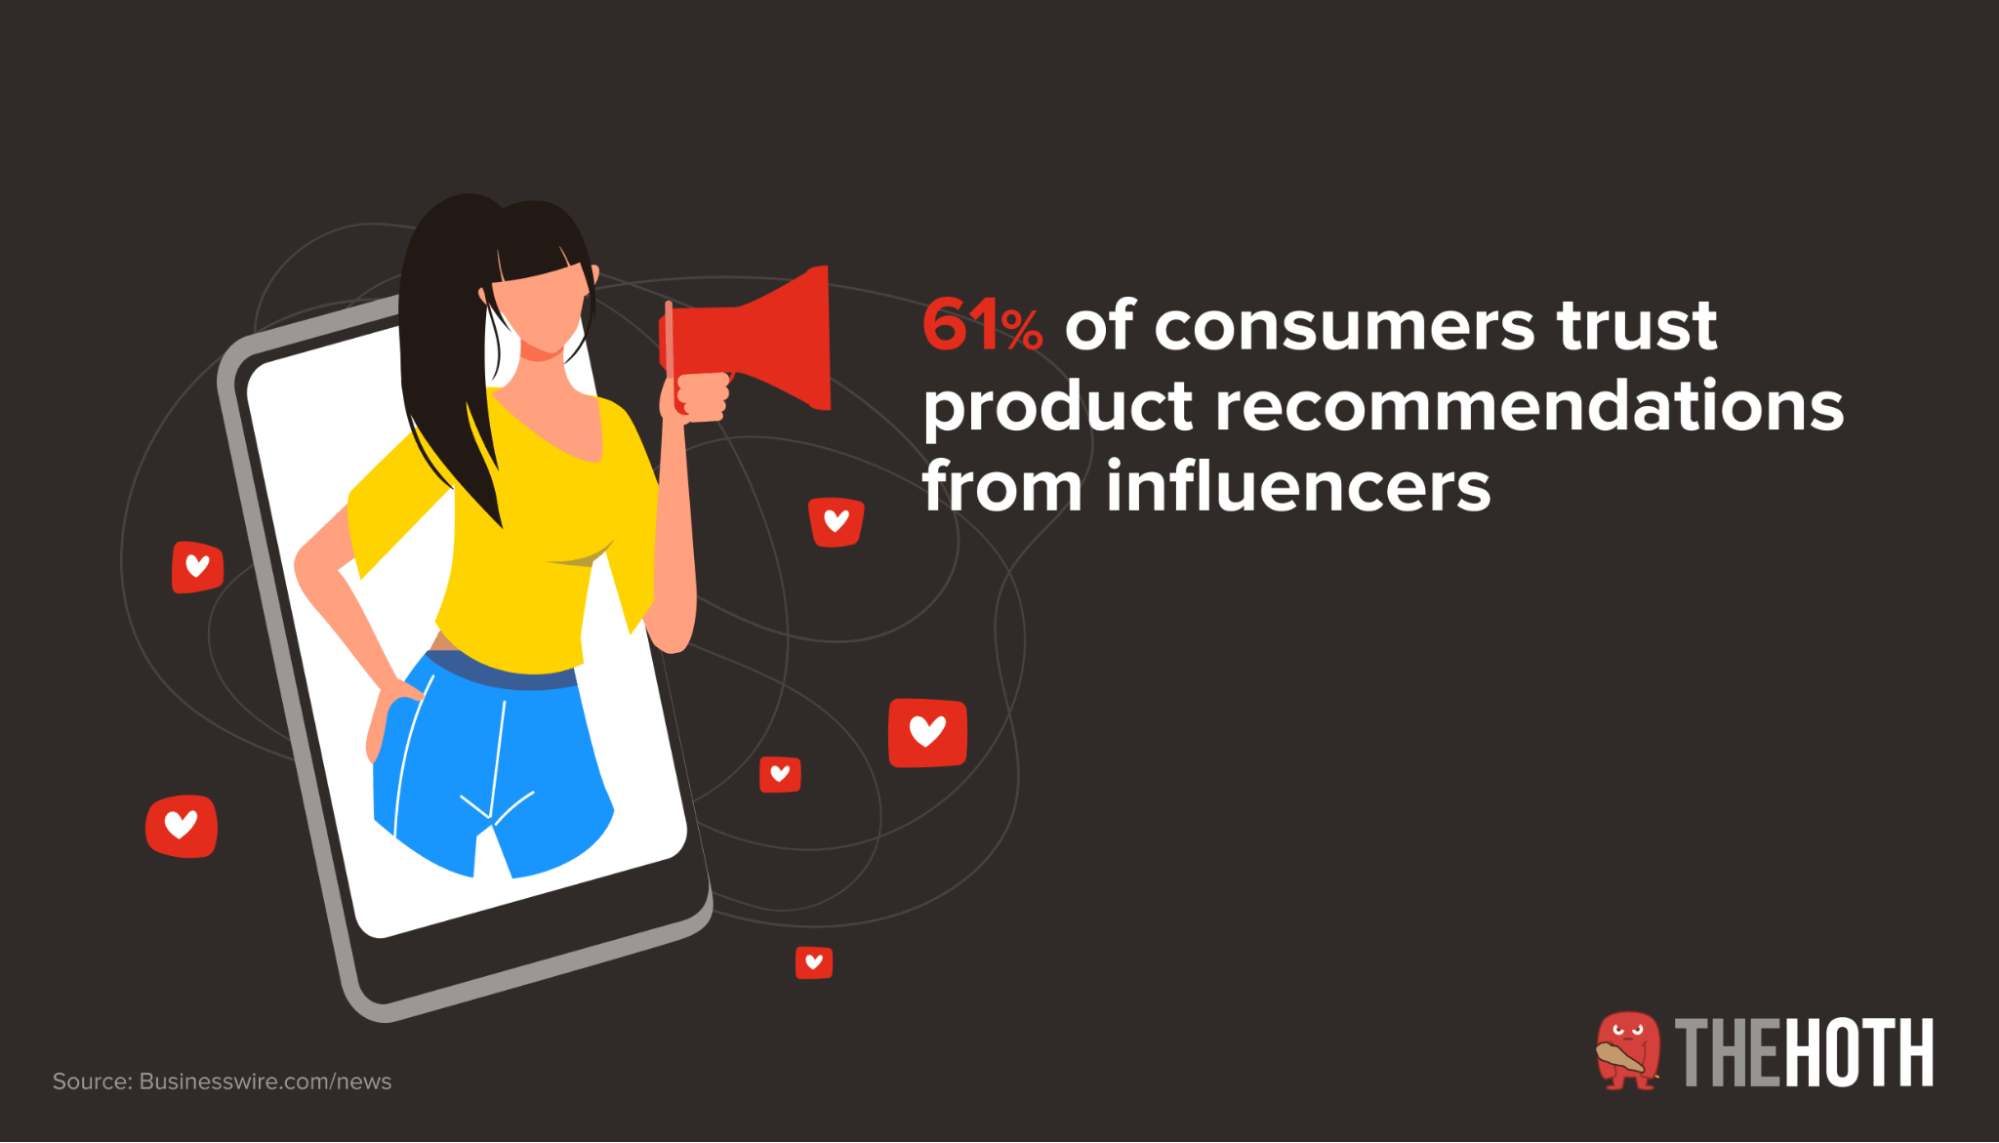 61% of consumers trust product recommendations from influencers